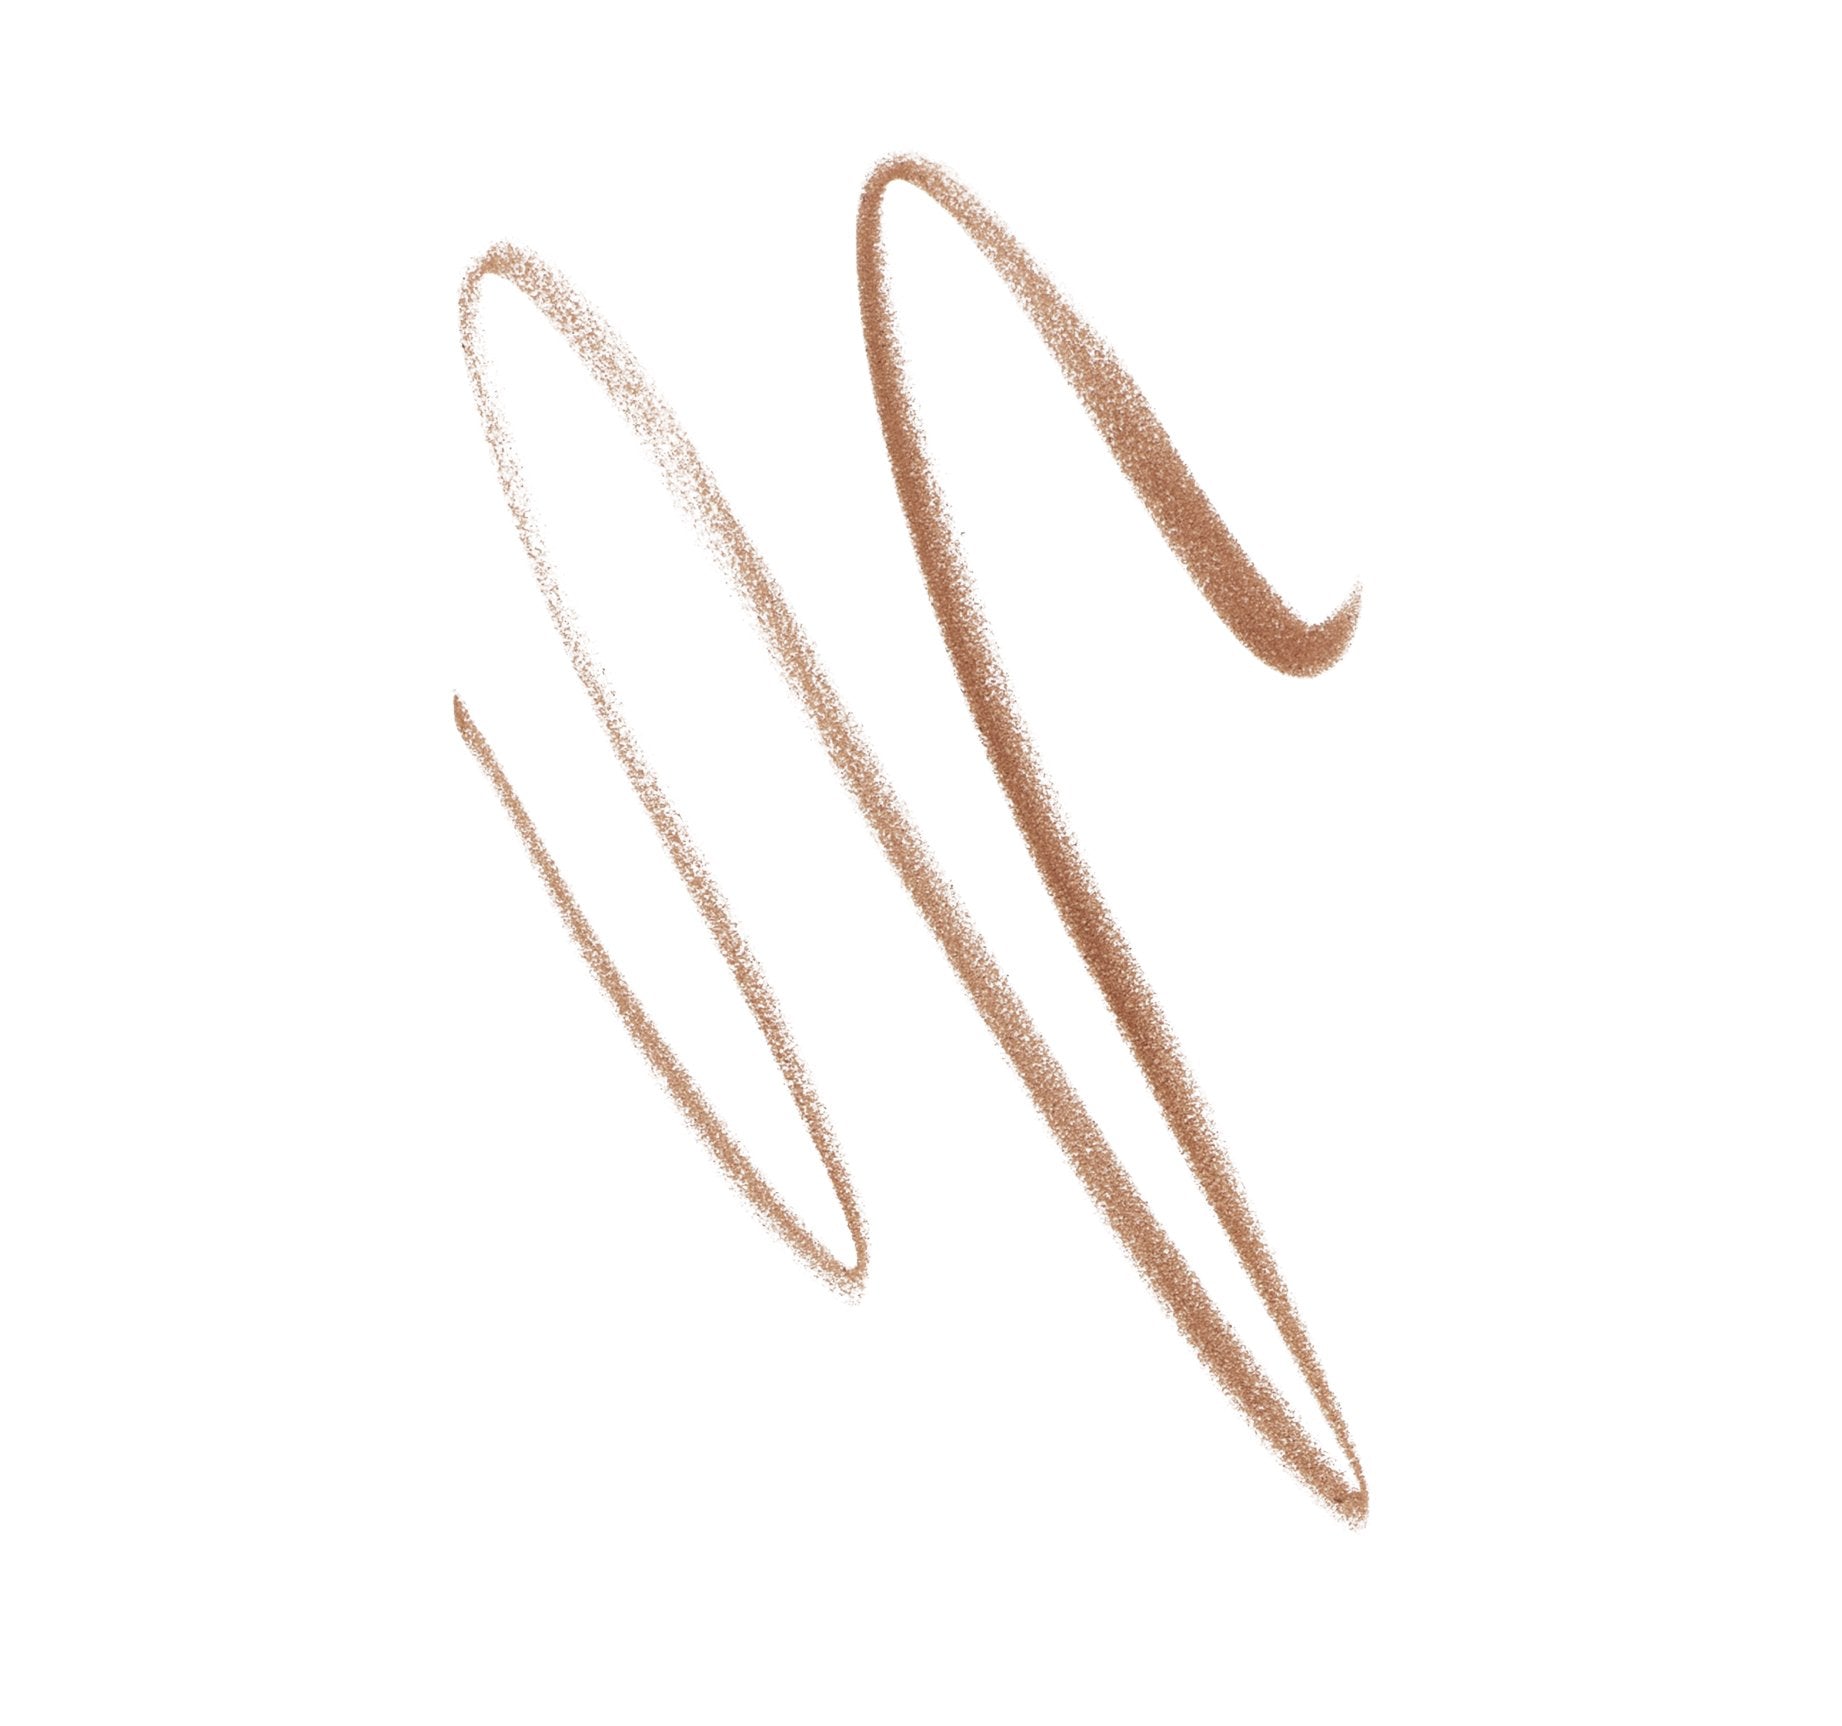 Definer Dual-Ended Brow Pencil & Spoolie - Almond - Image 10